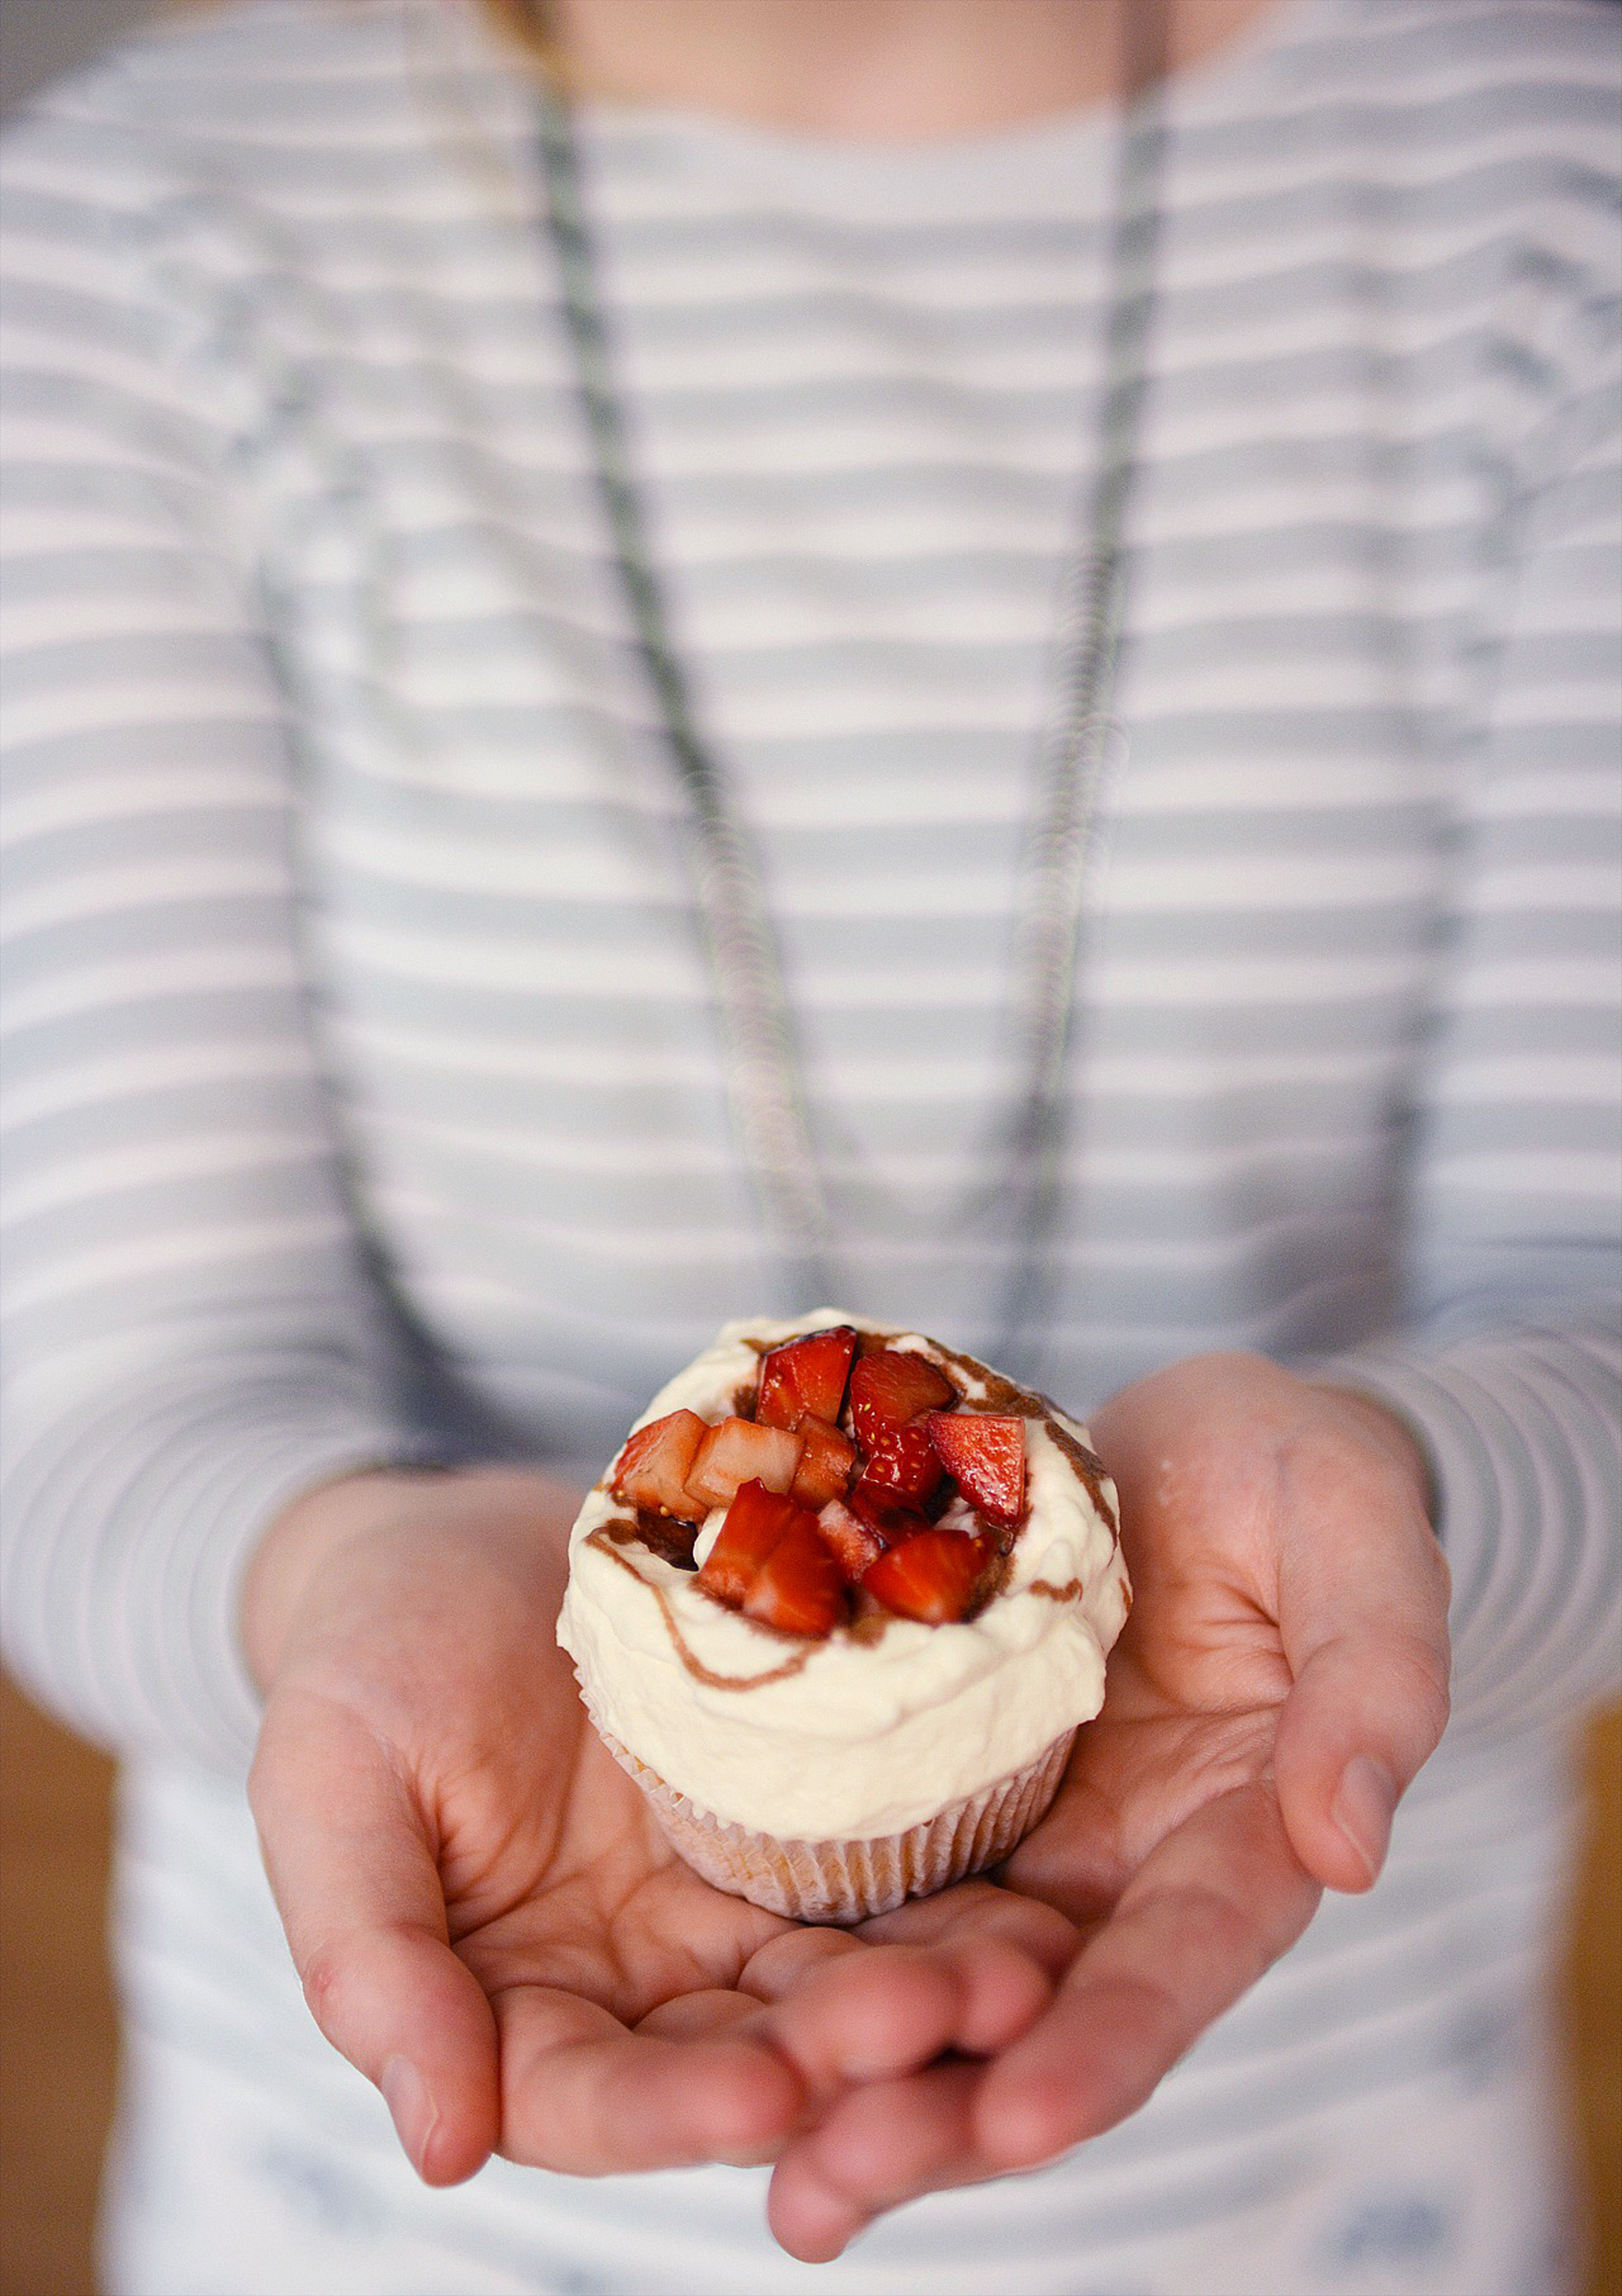 image of a woman holding a single cupcake with fresh cream, strawberries, and balsamic vinegar glaze in both hands